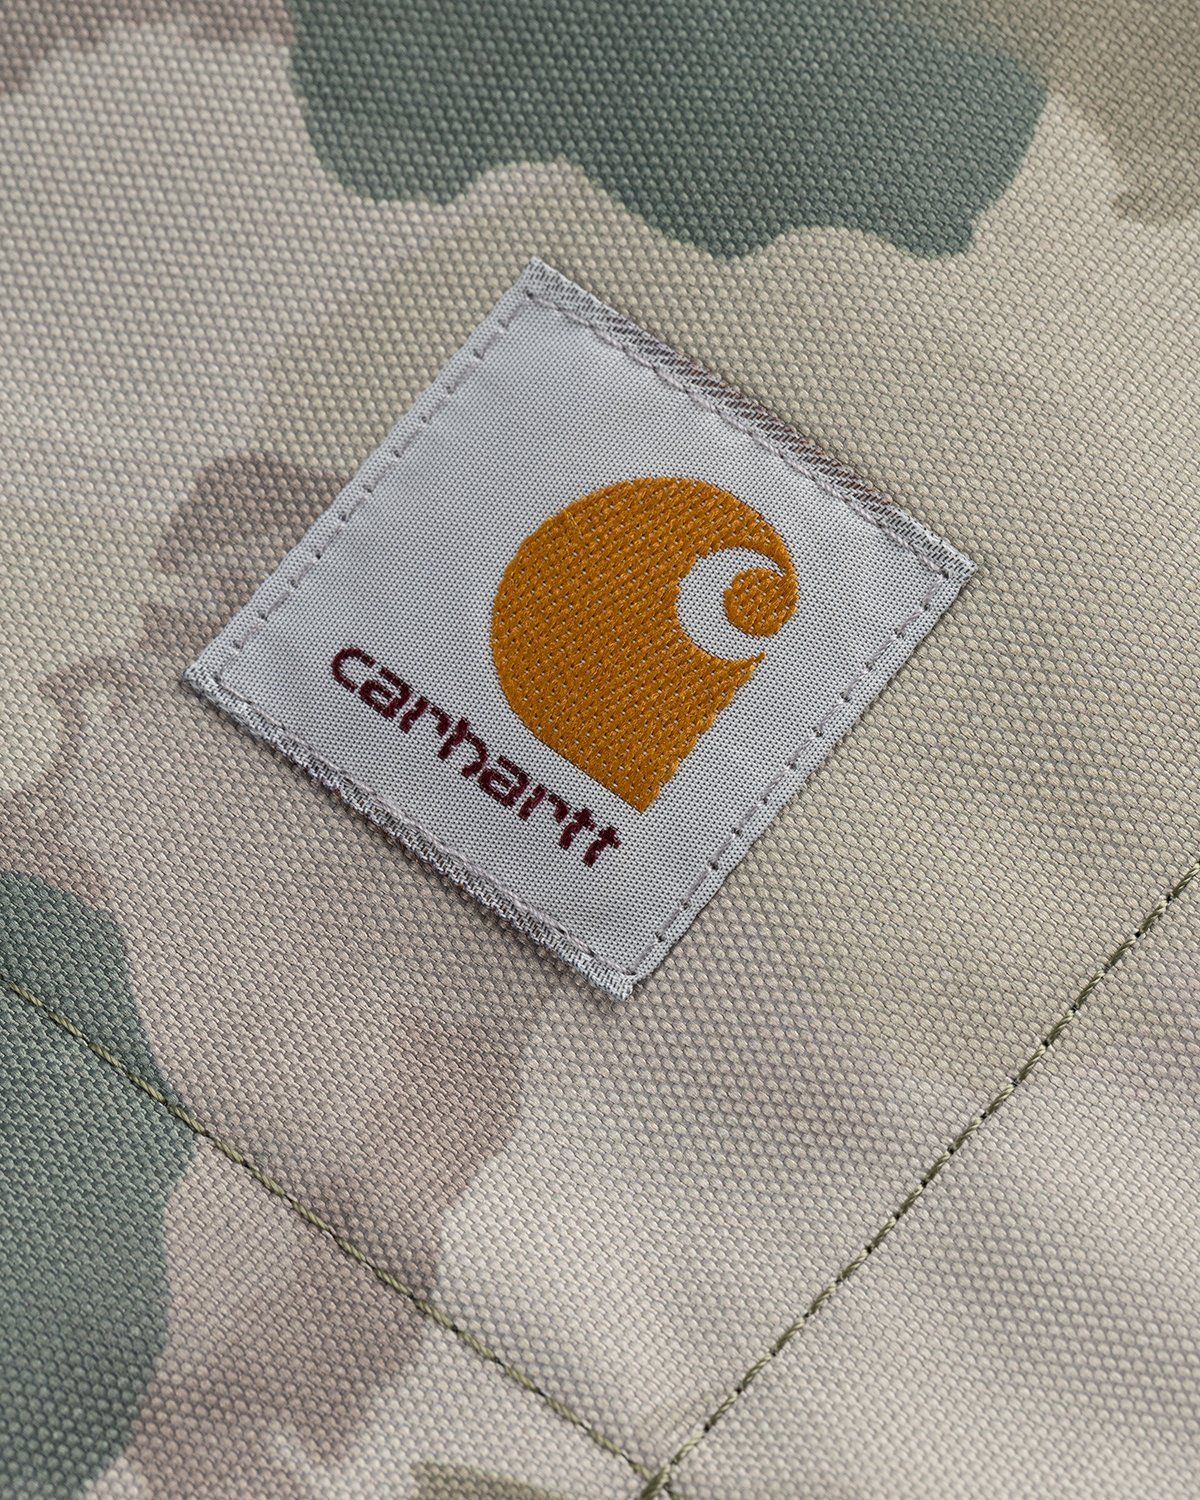 Carhartt WIP – Picnic Blanket Camo Tide Thyme - Blankets & Throws - Green - Image 5